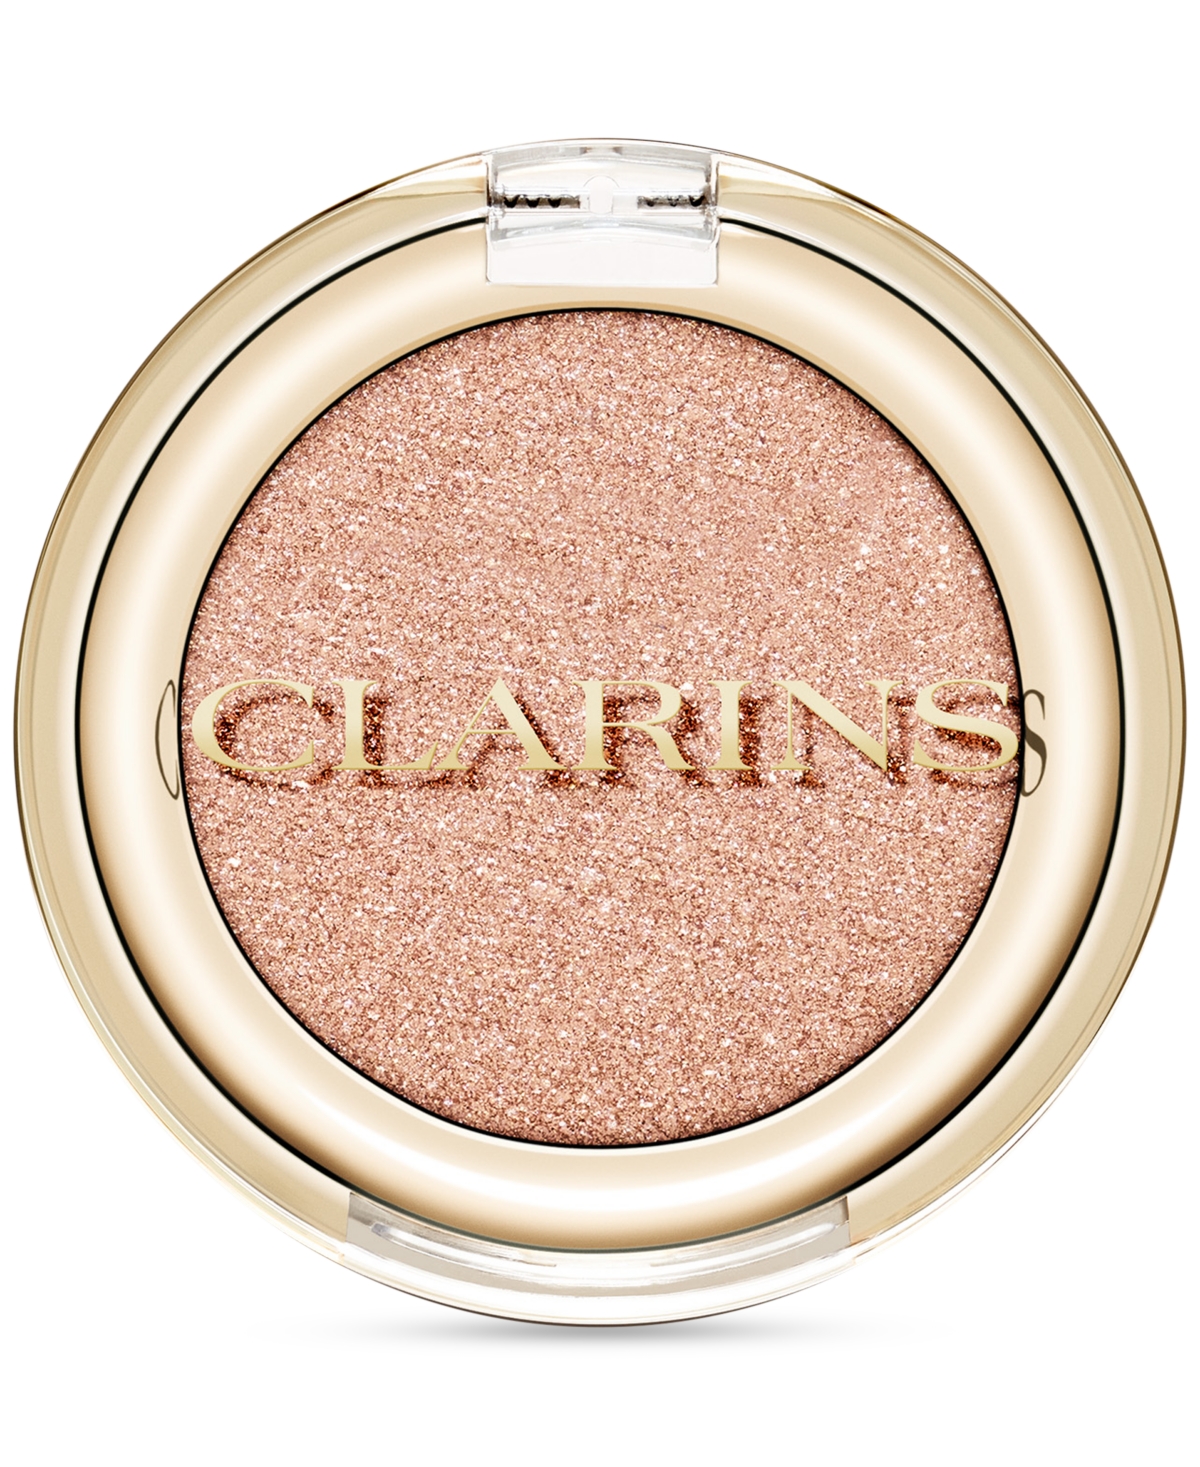 Clarins Ombre Skin Highly Pigmented & Crease-proof Eyeshadow In Pearly Rose Gold